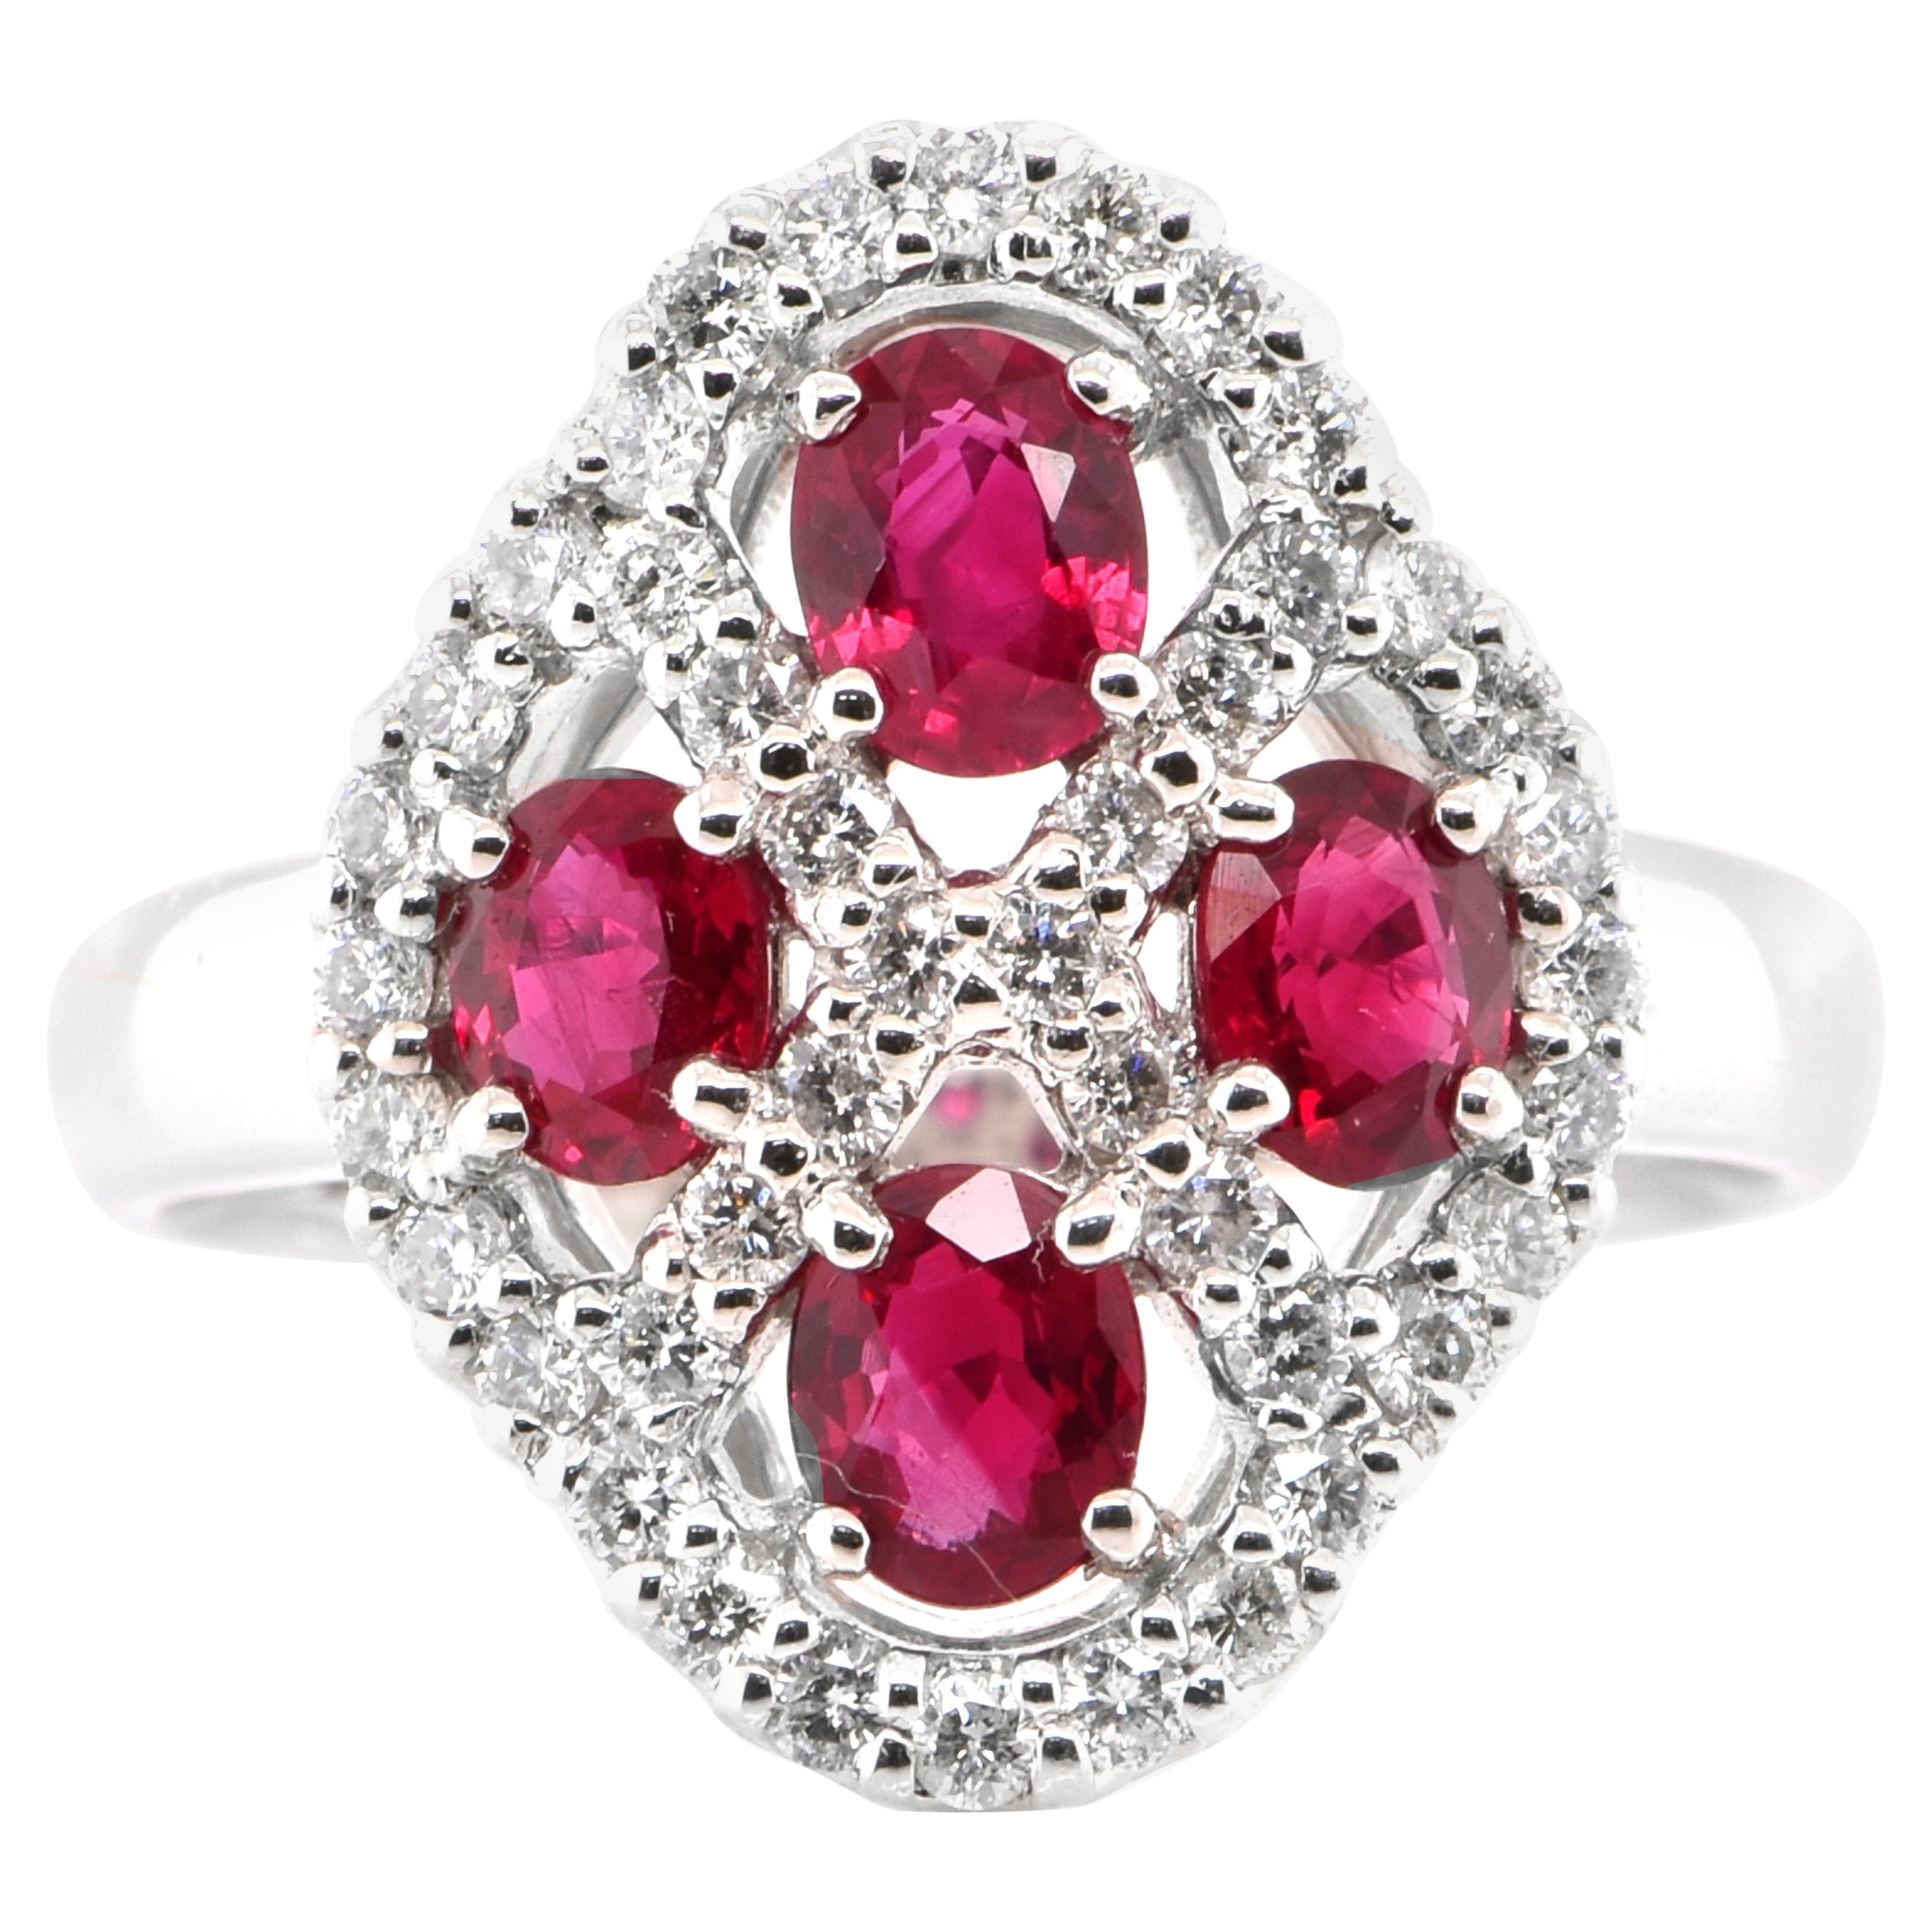 1.34 Carat Natural Rubies and Diamond Cocktail Ring Set in Platinum For Sale